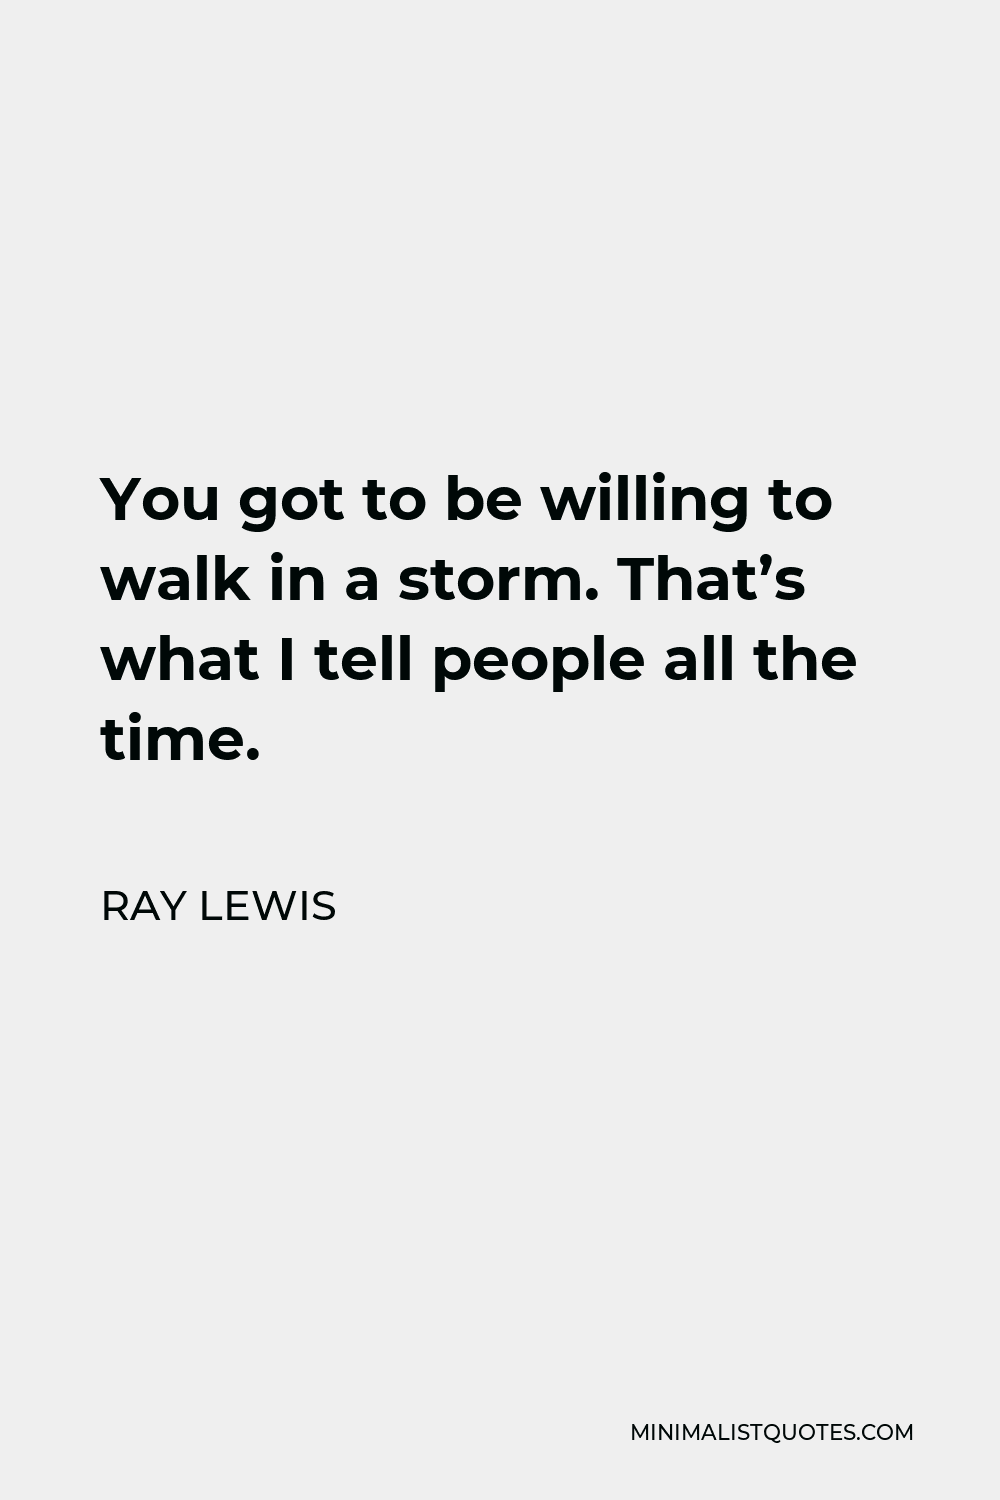 Ray Lewis Quote - You got to be willing to walk in a storm. That’s what I tell people all the time.